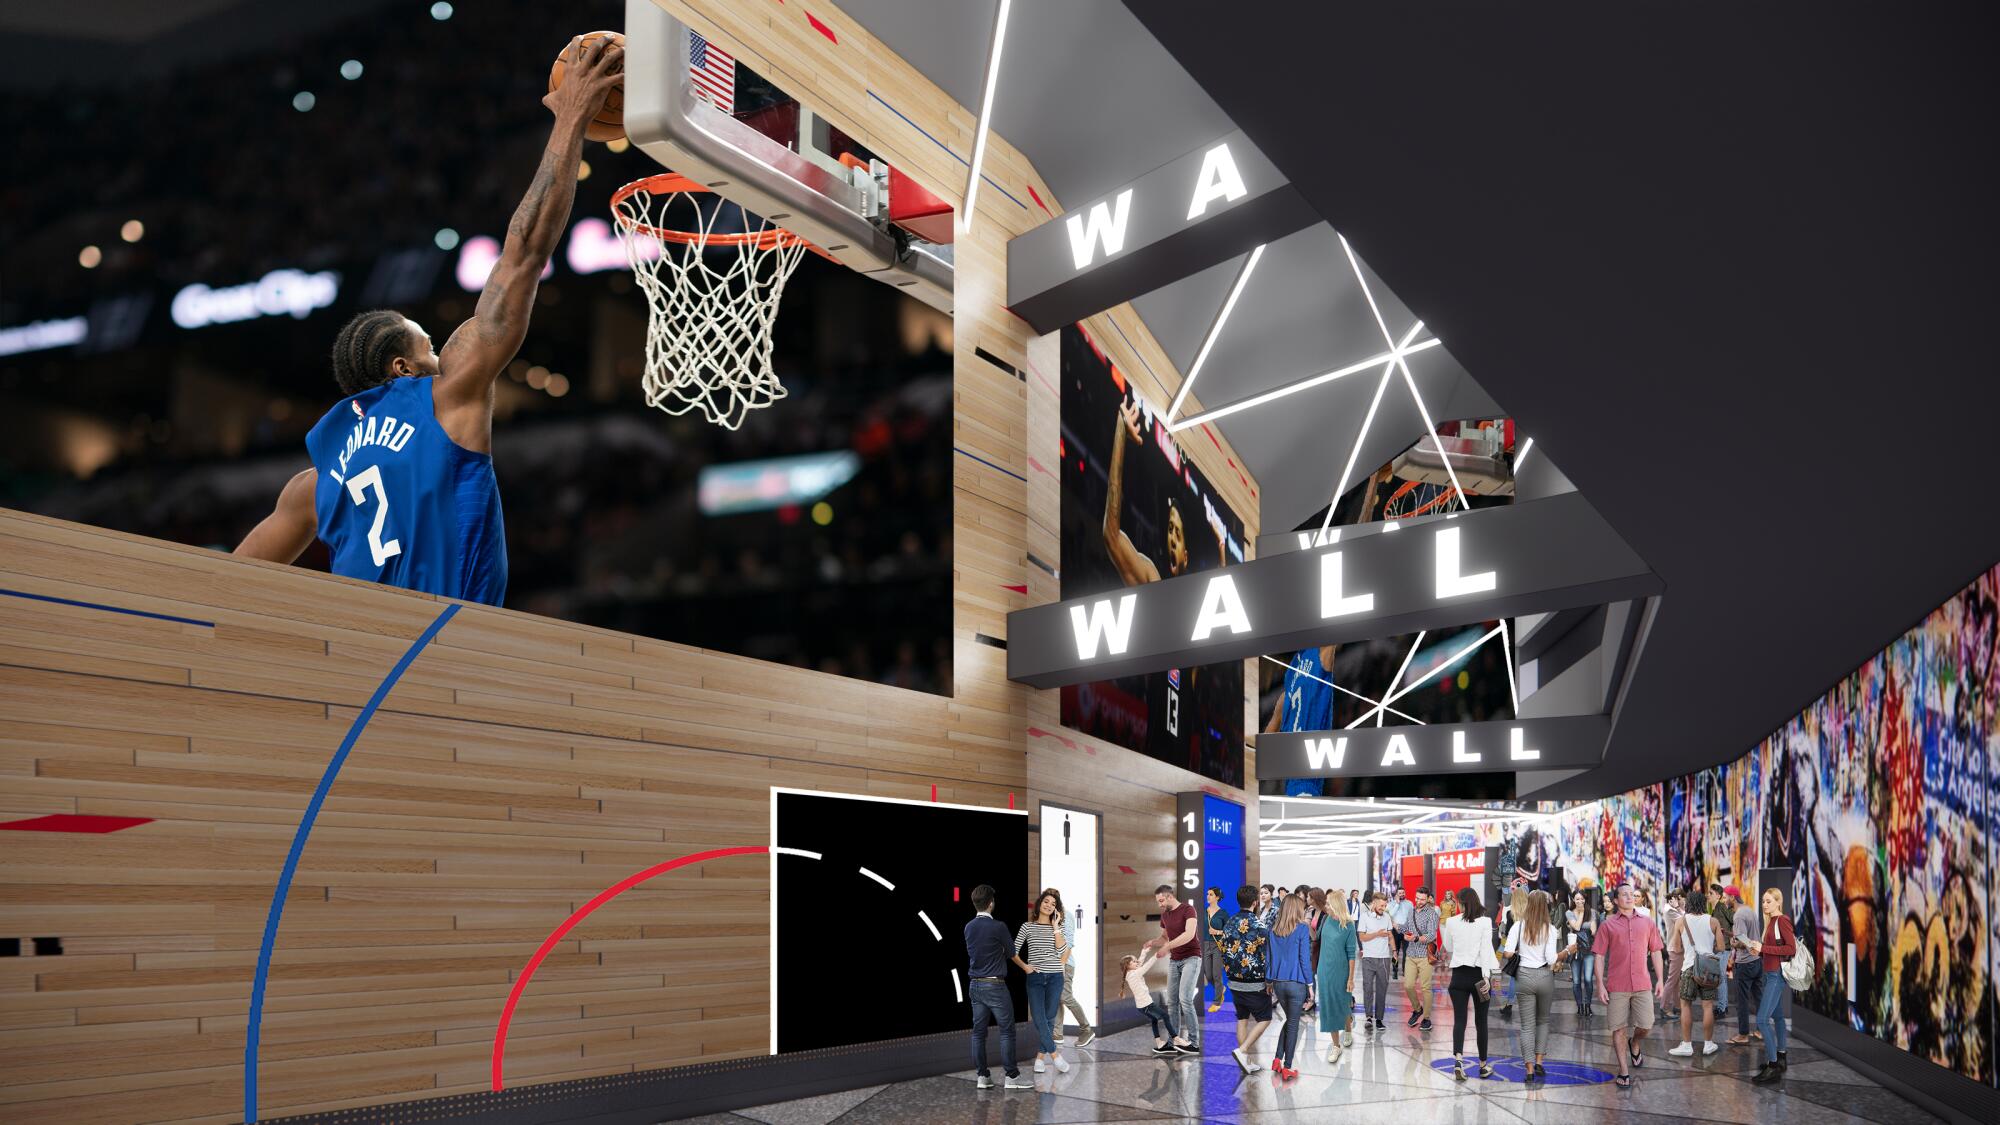 A poster of Kawhi Leonard dunking is featured on one end of the arena, on the concourse behind "The Wall."